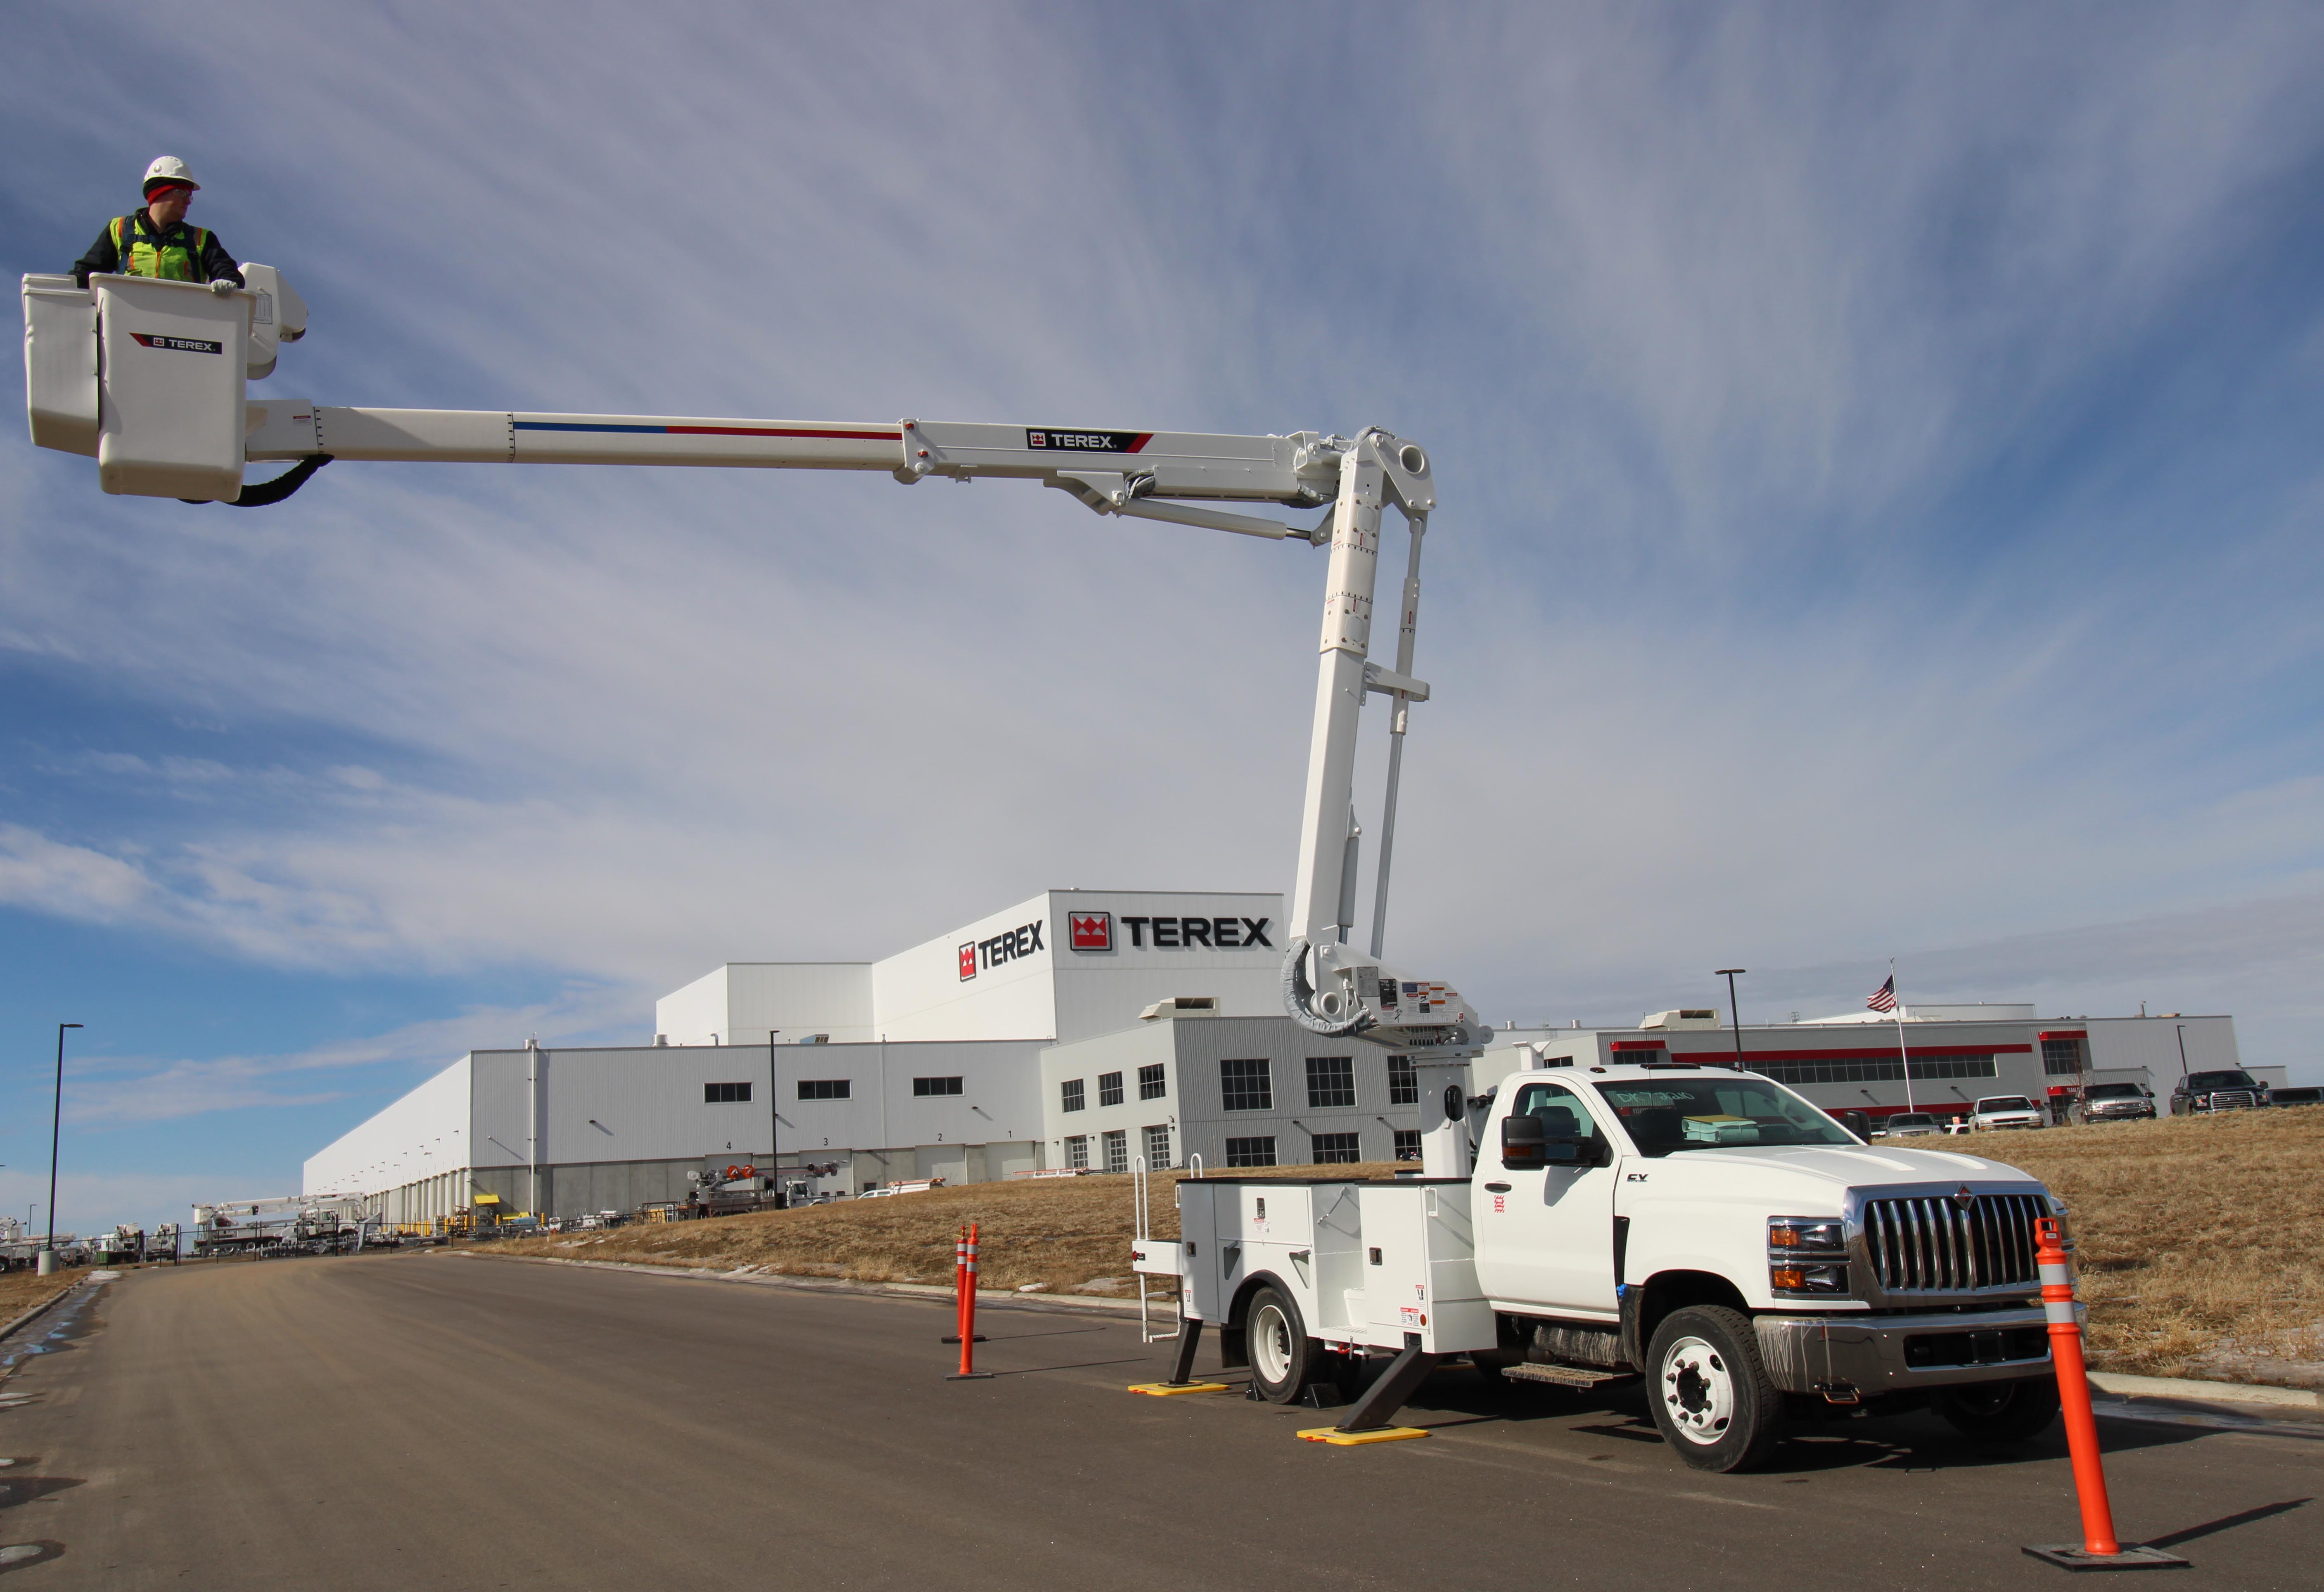 The Terex Hi-Ranger TL48 articulated & telescopic aerial device is optimized for the newer super duty chassis with superior jib capacity balanced with strong payload capacities to meet the needs of trouble truck applications. 